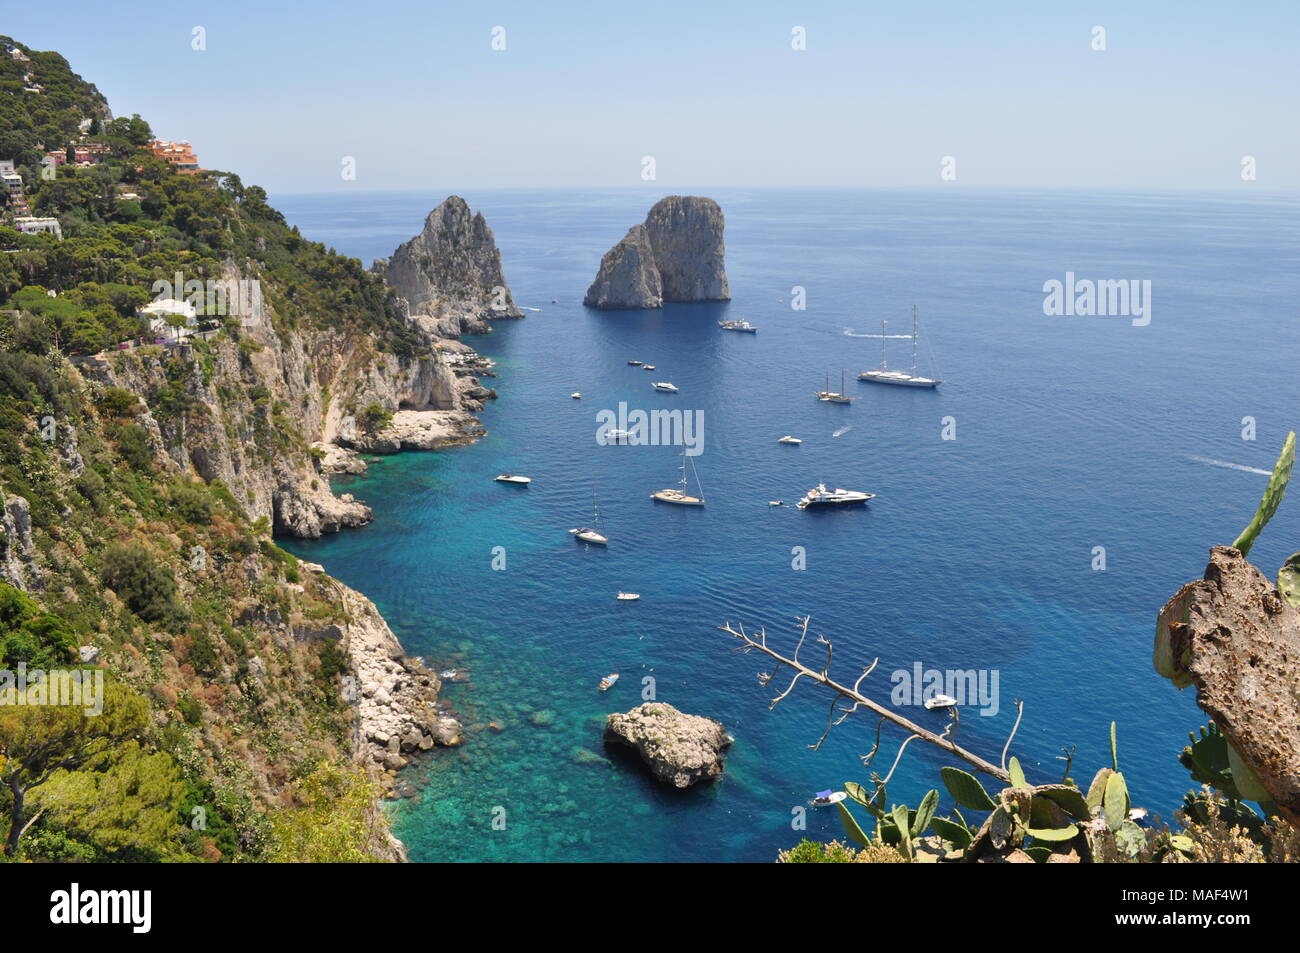 Bay, cliffs and turquoise blue water of Capri island, Italy Stock Photo